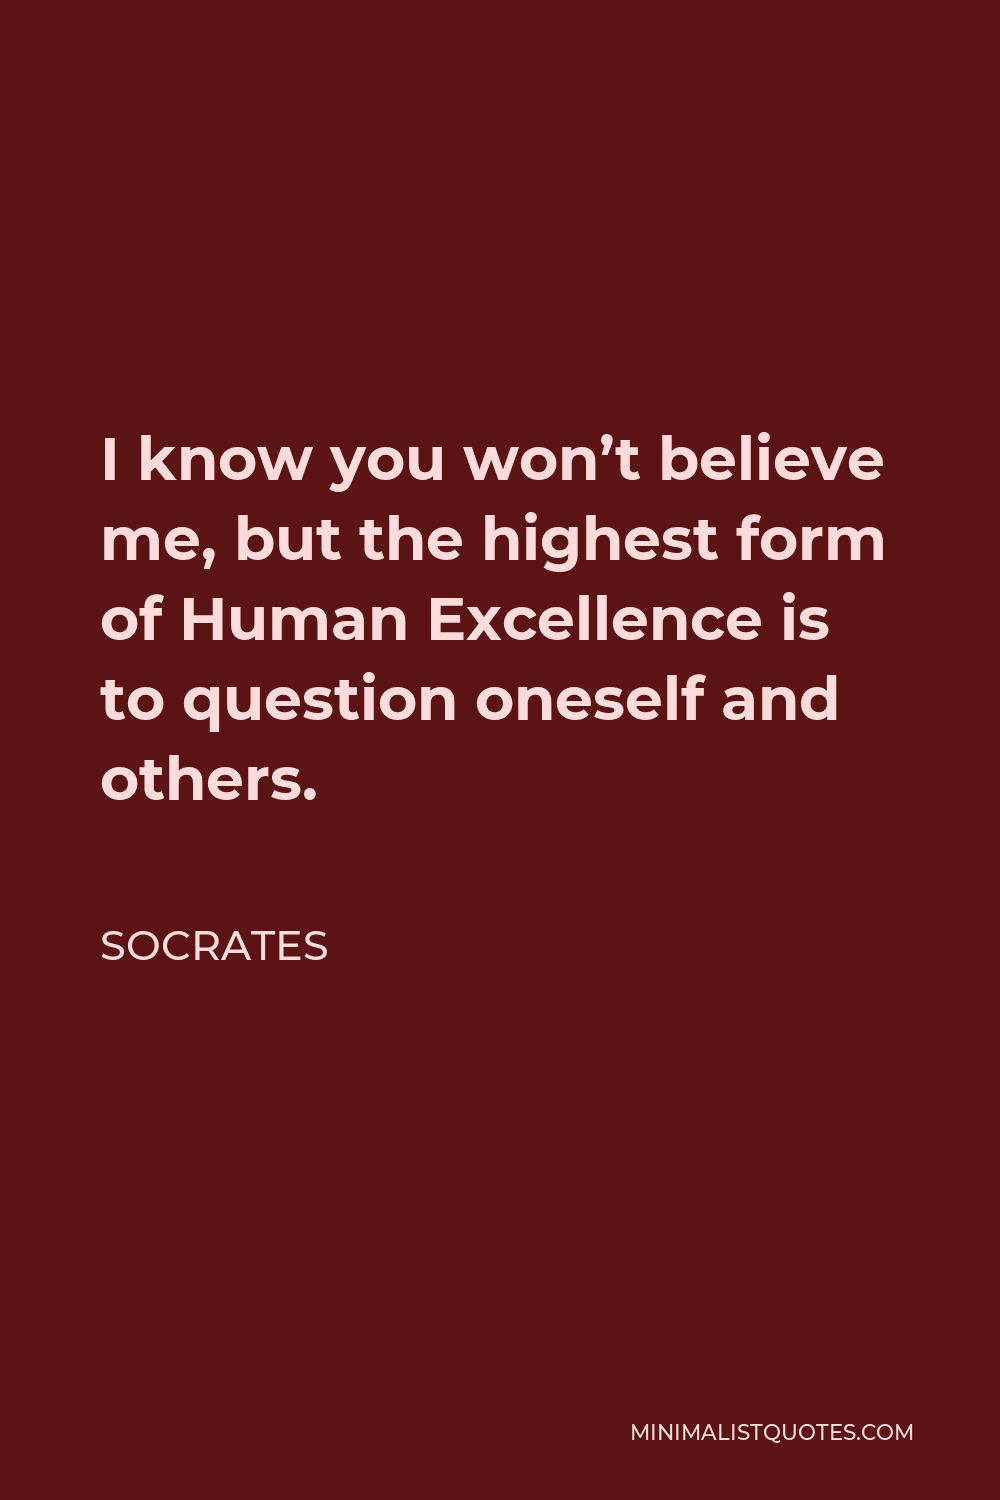 Socrates Quote - I know you won’t believe me, but the highest form of Human Excellence is to question oneself and others.